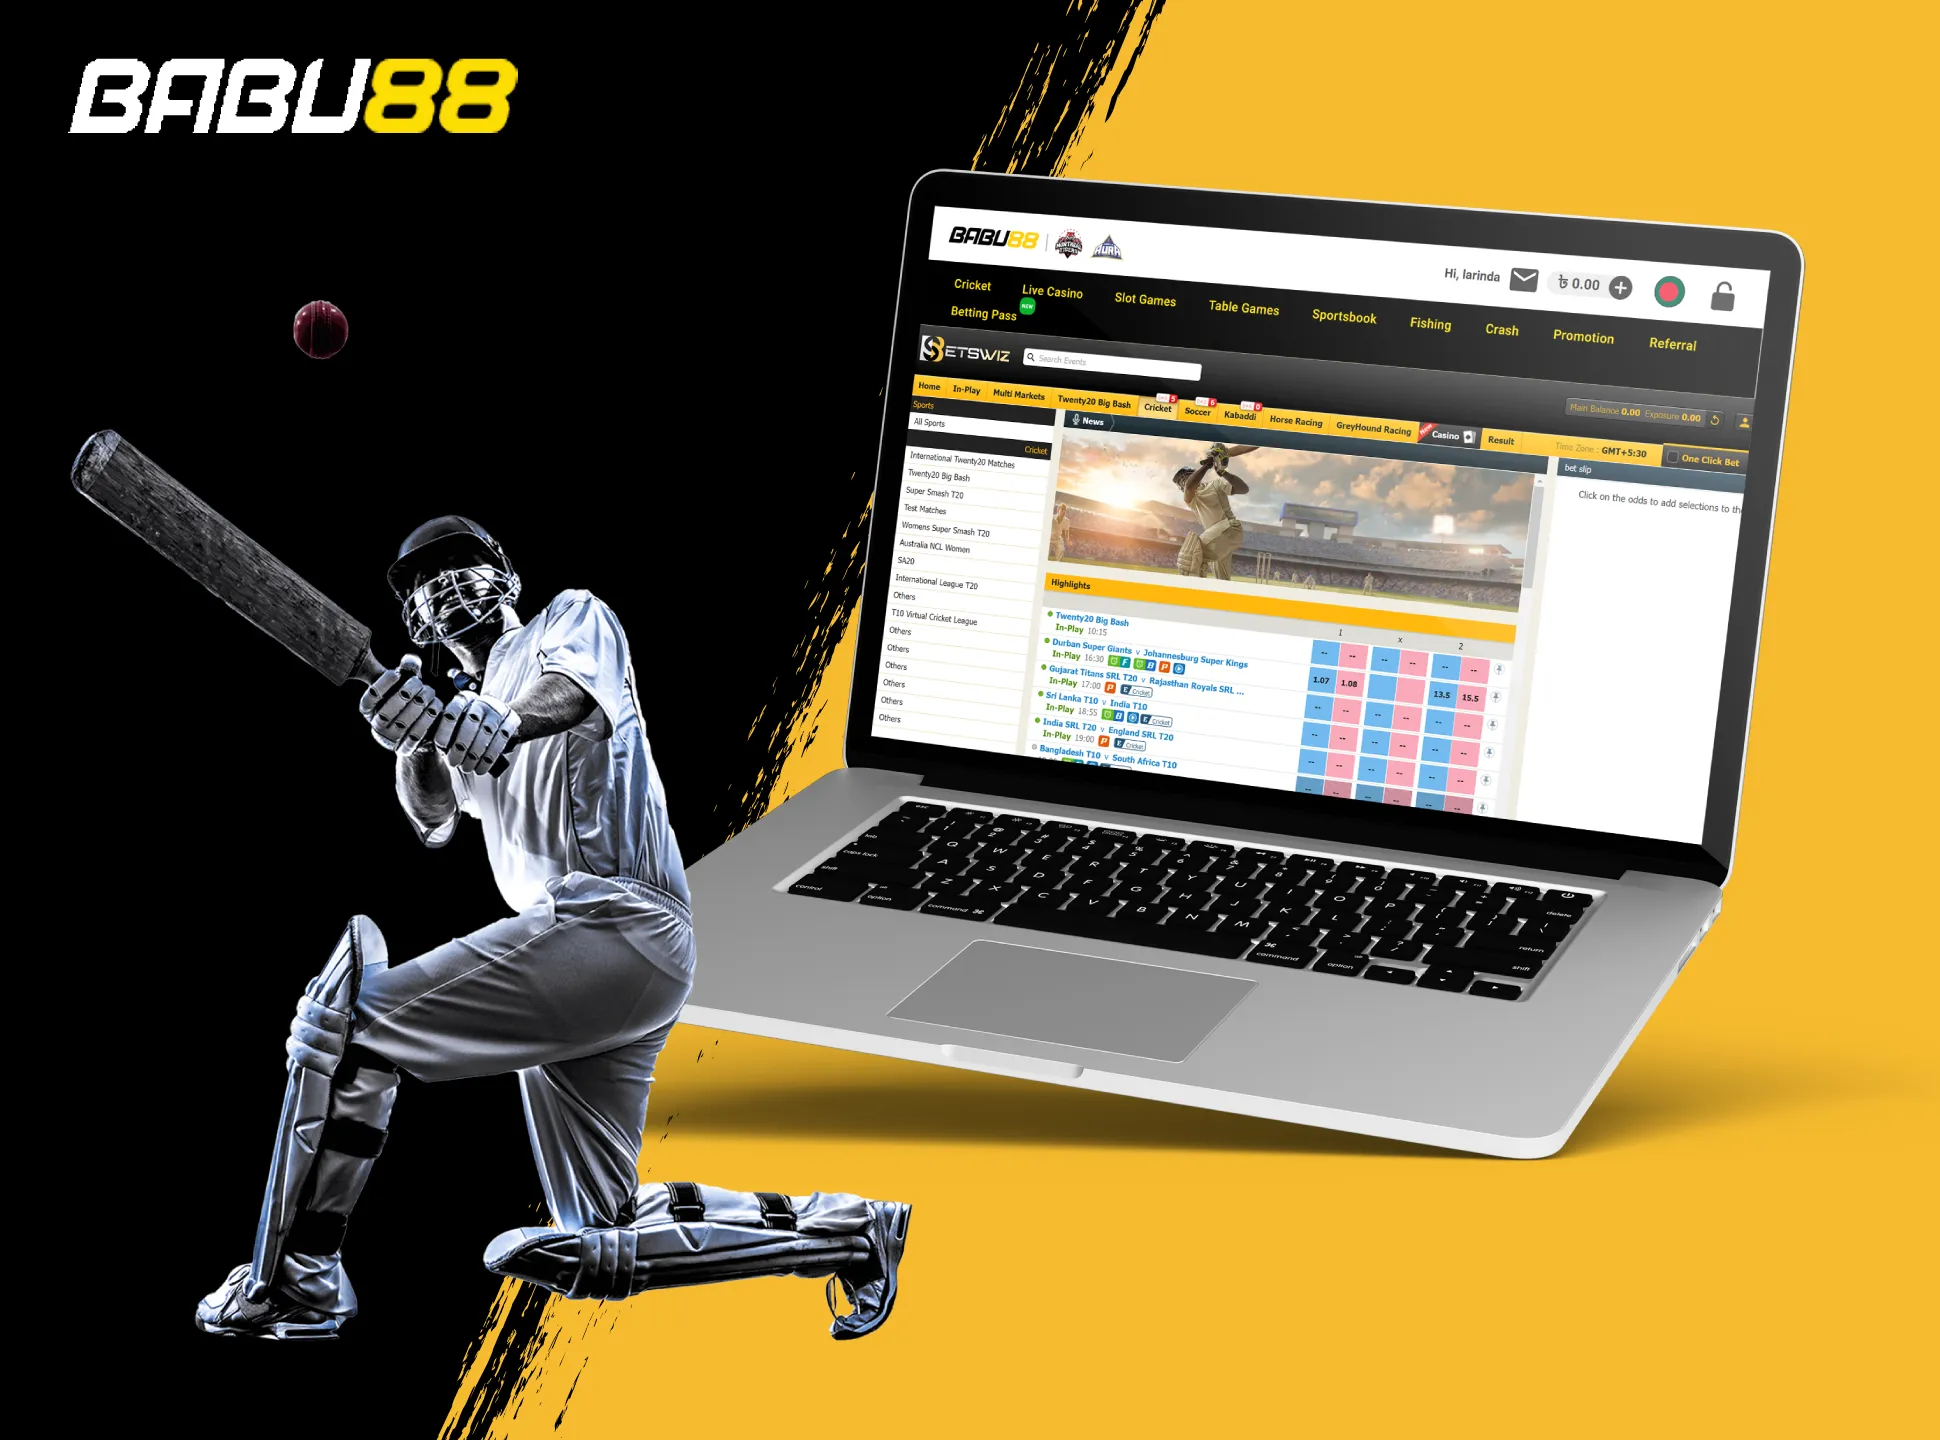 You can easilly bet on cricket matches in the Babu88 sportsbook.